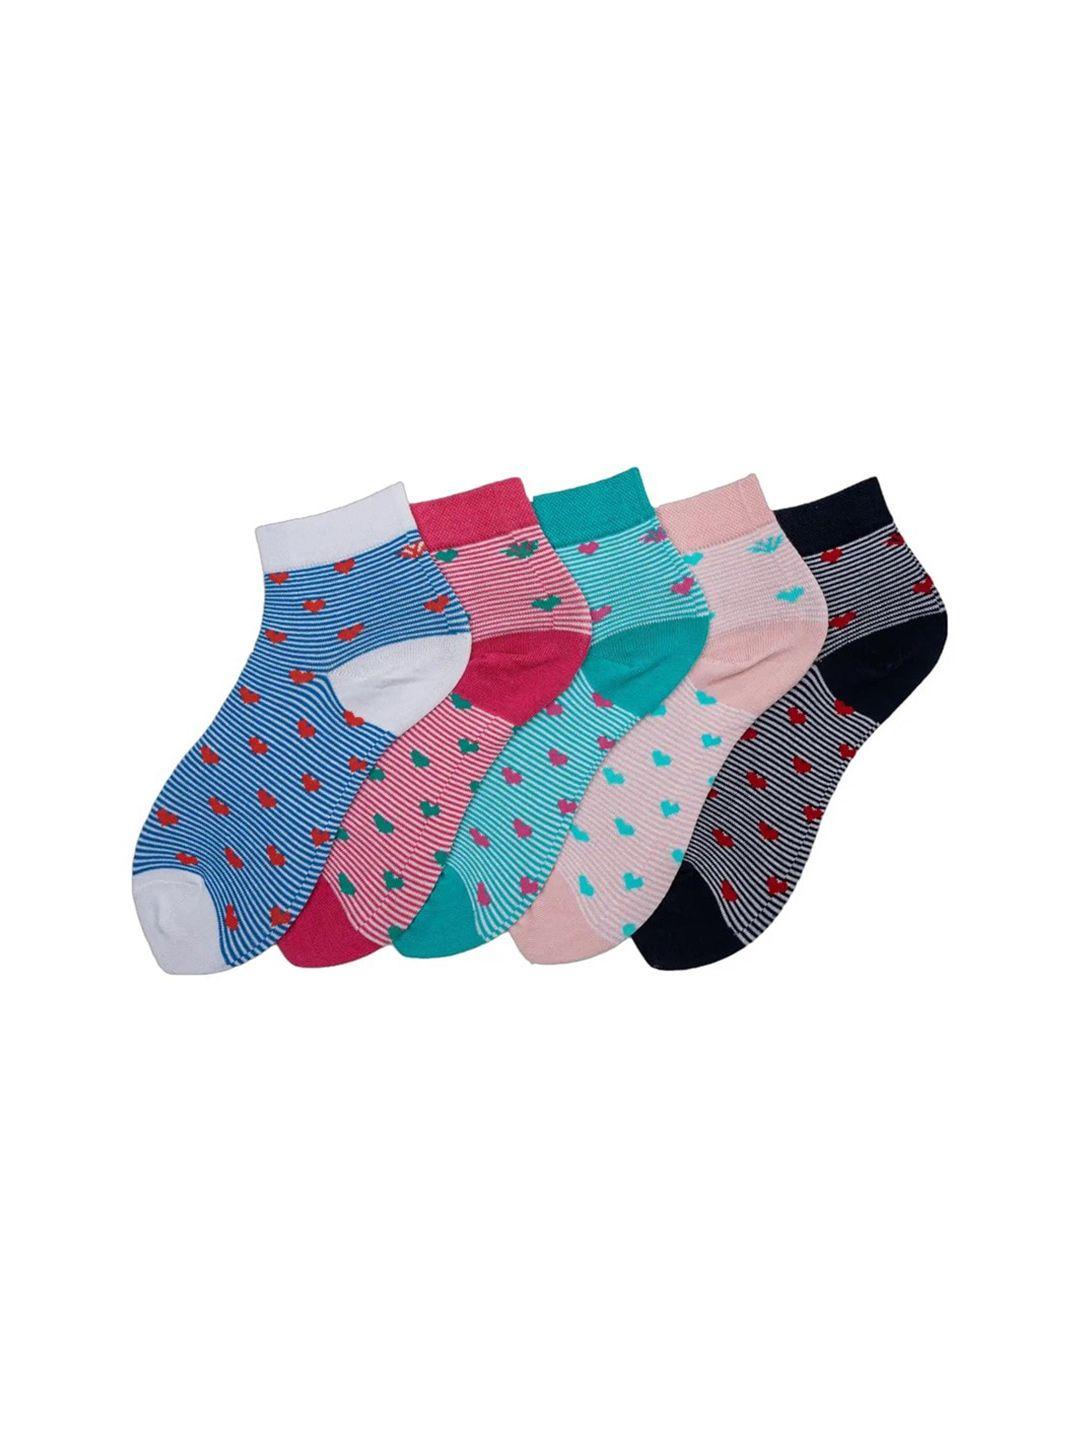 cotstyle women pack of 5 patterned ankle-length socks